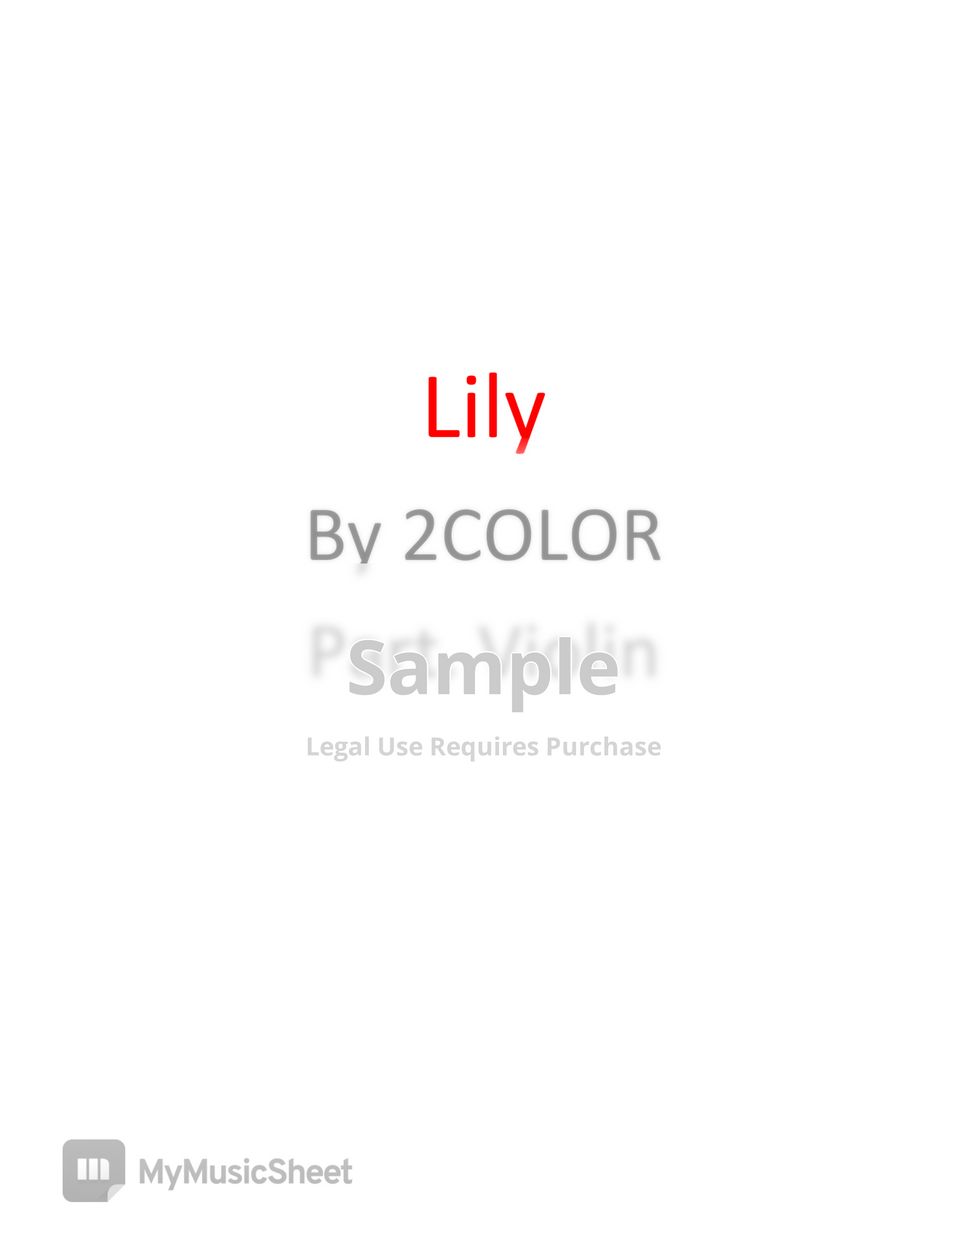 Alan Walker - Lily by 2COLOR